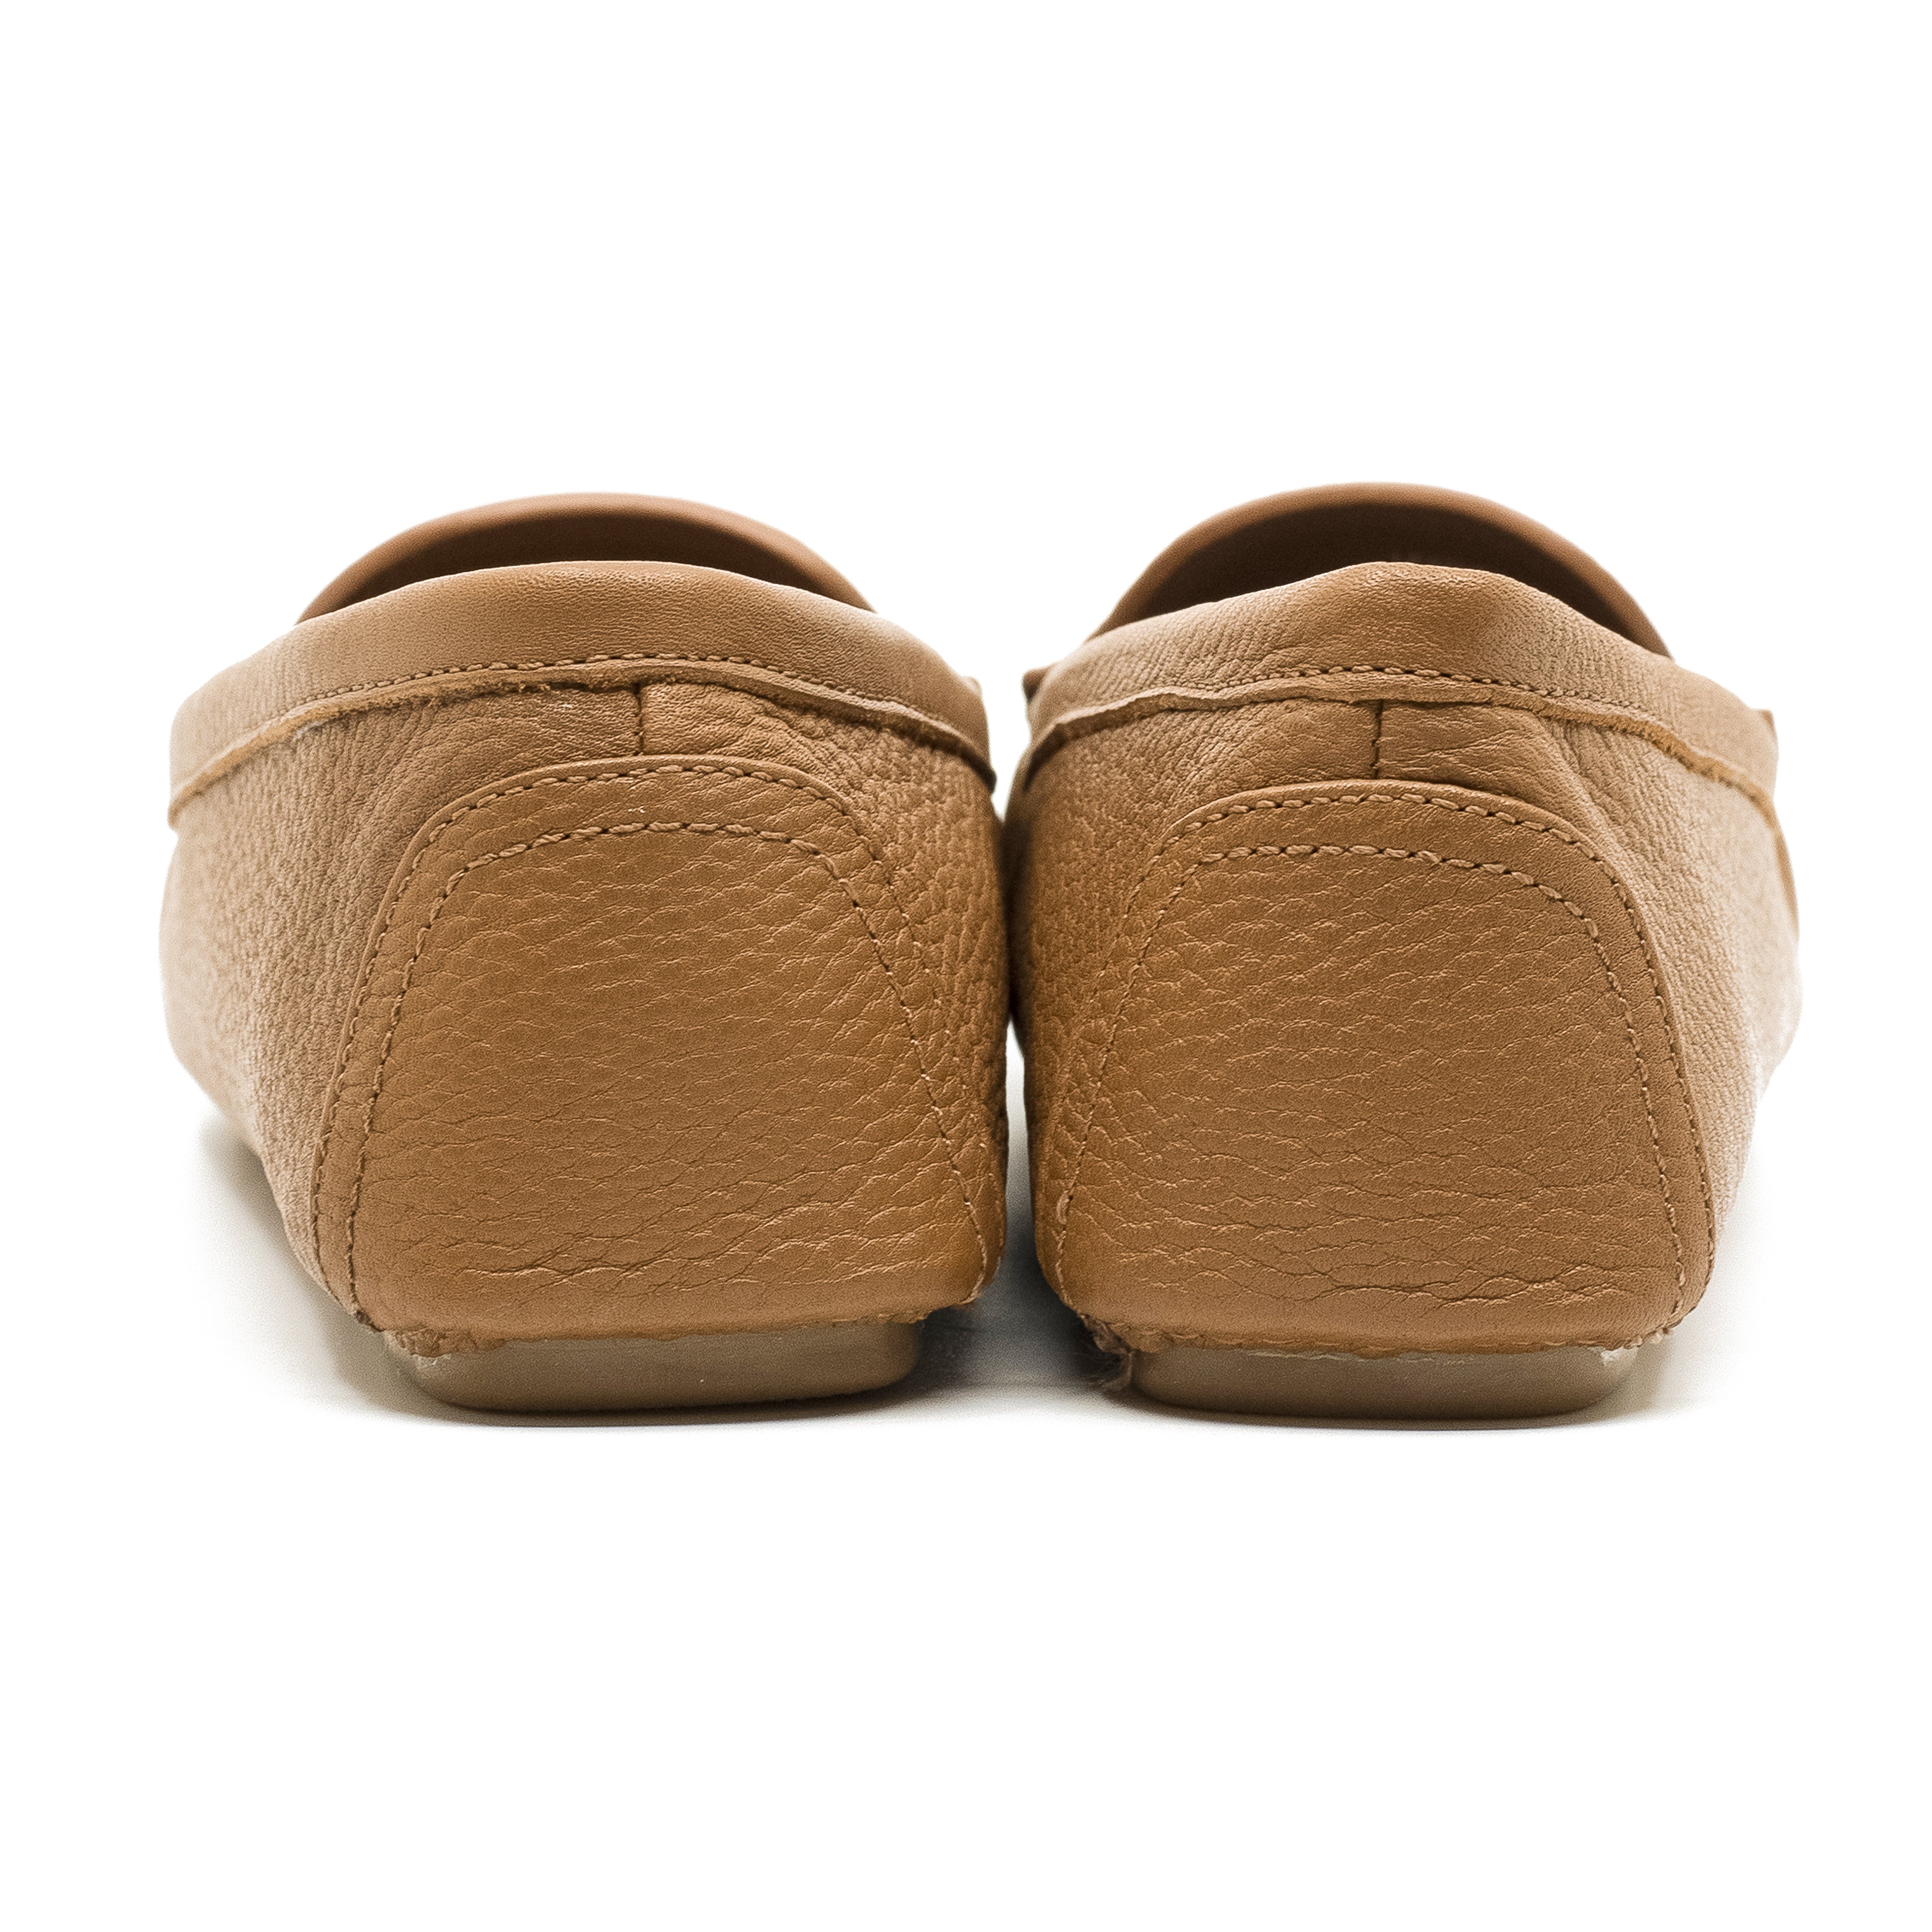 Lowell2 Moccasins in Royal Tan